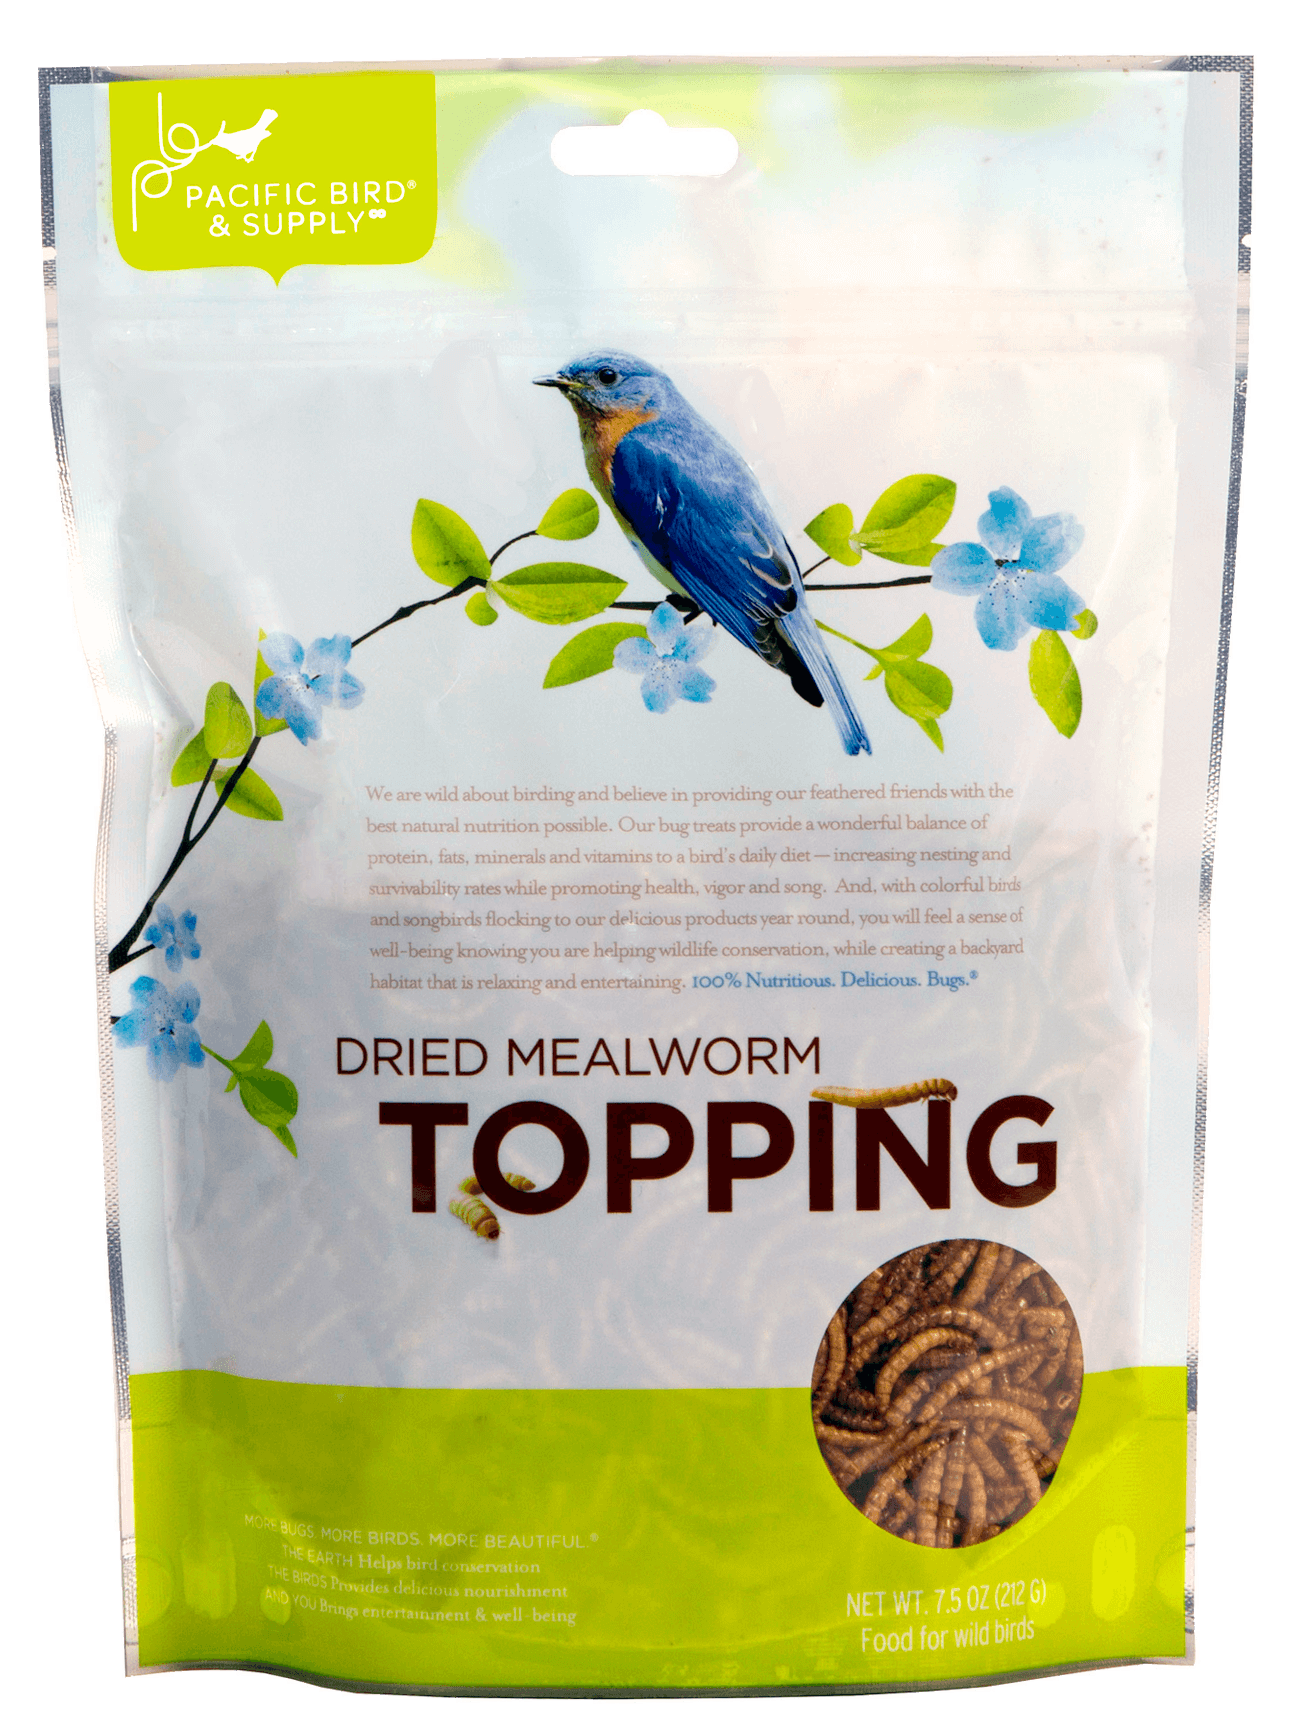 Dried Mealworm Topping (7.50oz)